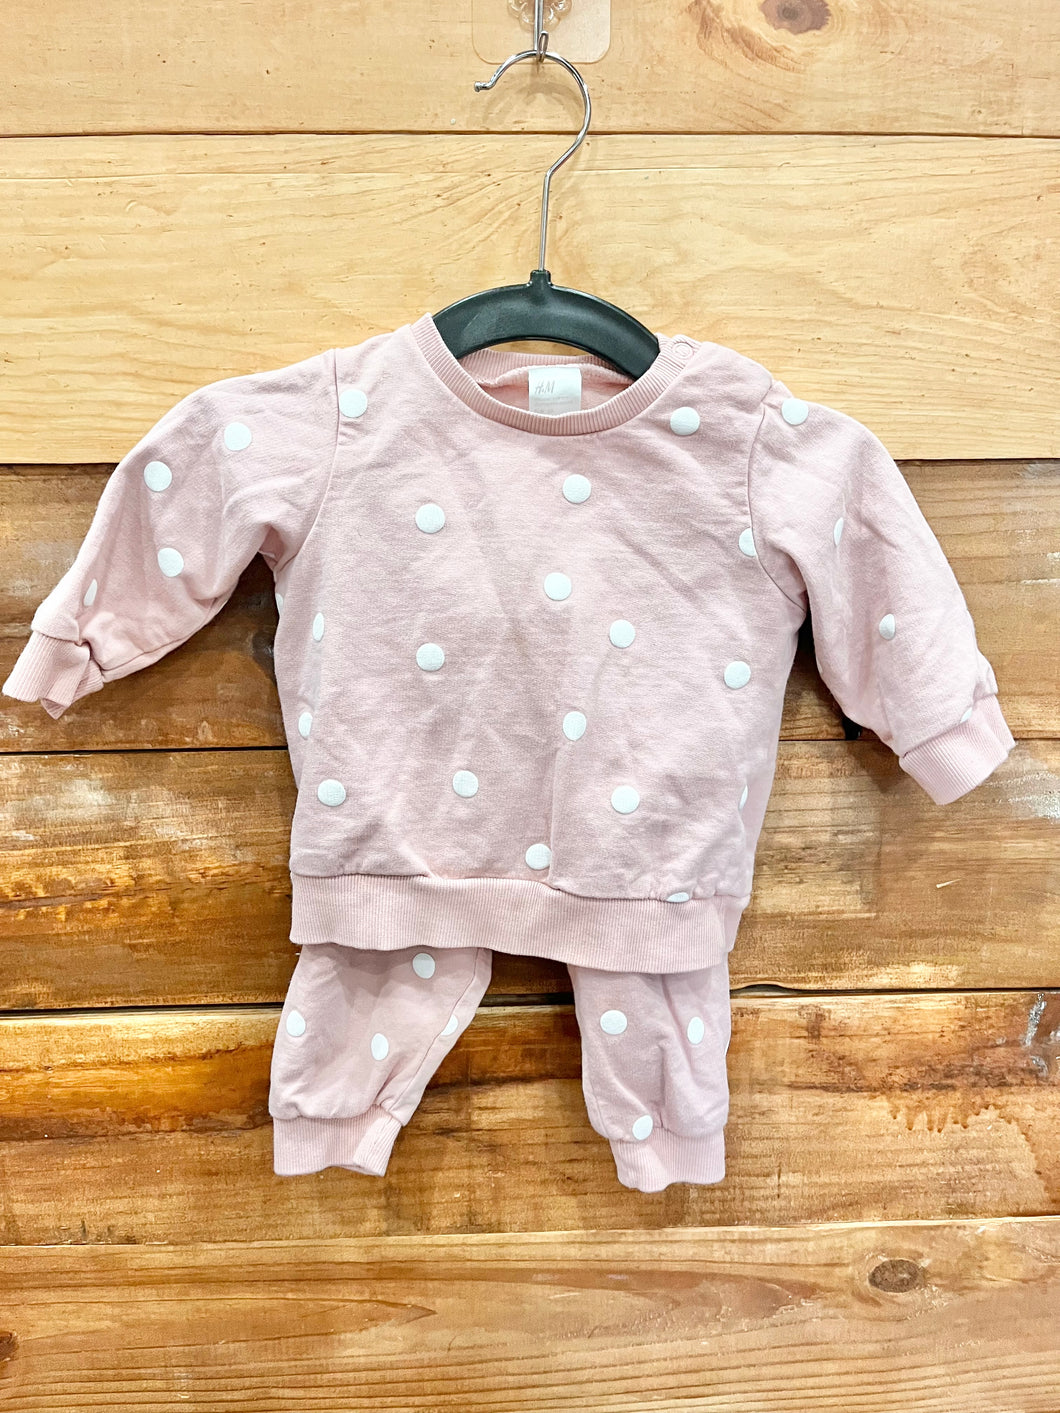 H&M Pink Polka Dot 2pc Outfit Size 6m